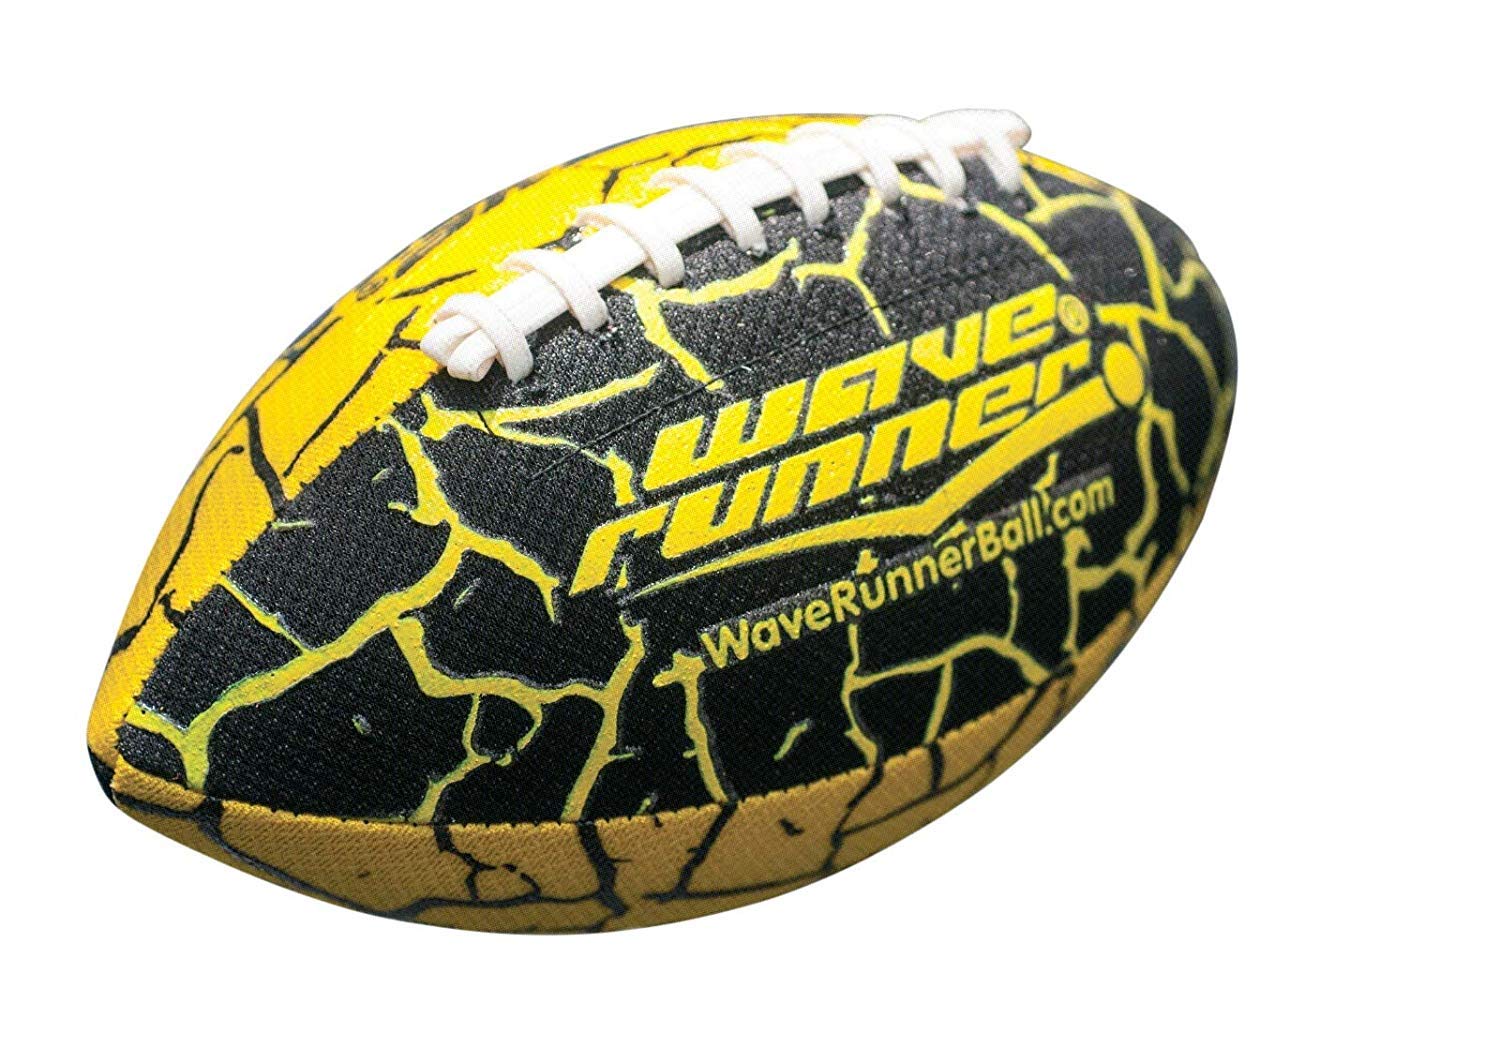 Wave Runner Grip It Waterproof Football- Size 9.25 Inches with Sure-Grip Technology | Let's Play Football in The Water! (Random Color)